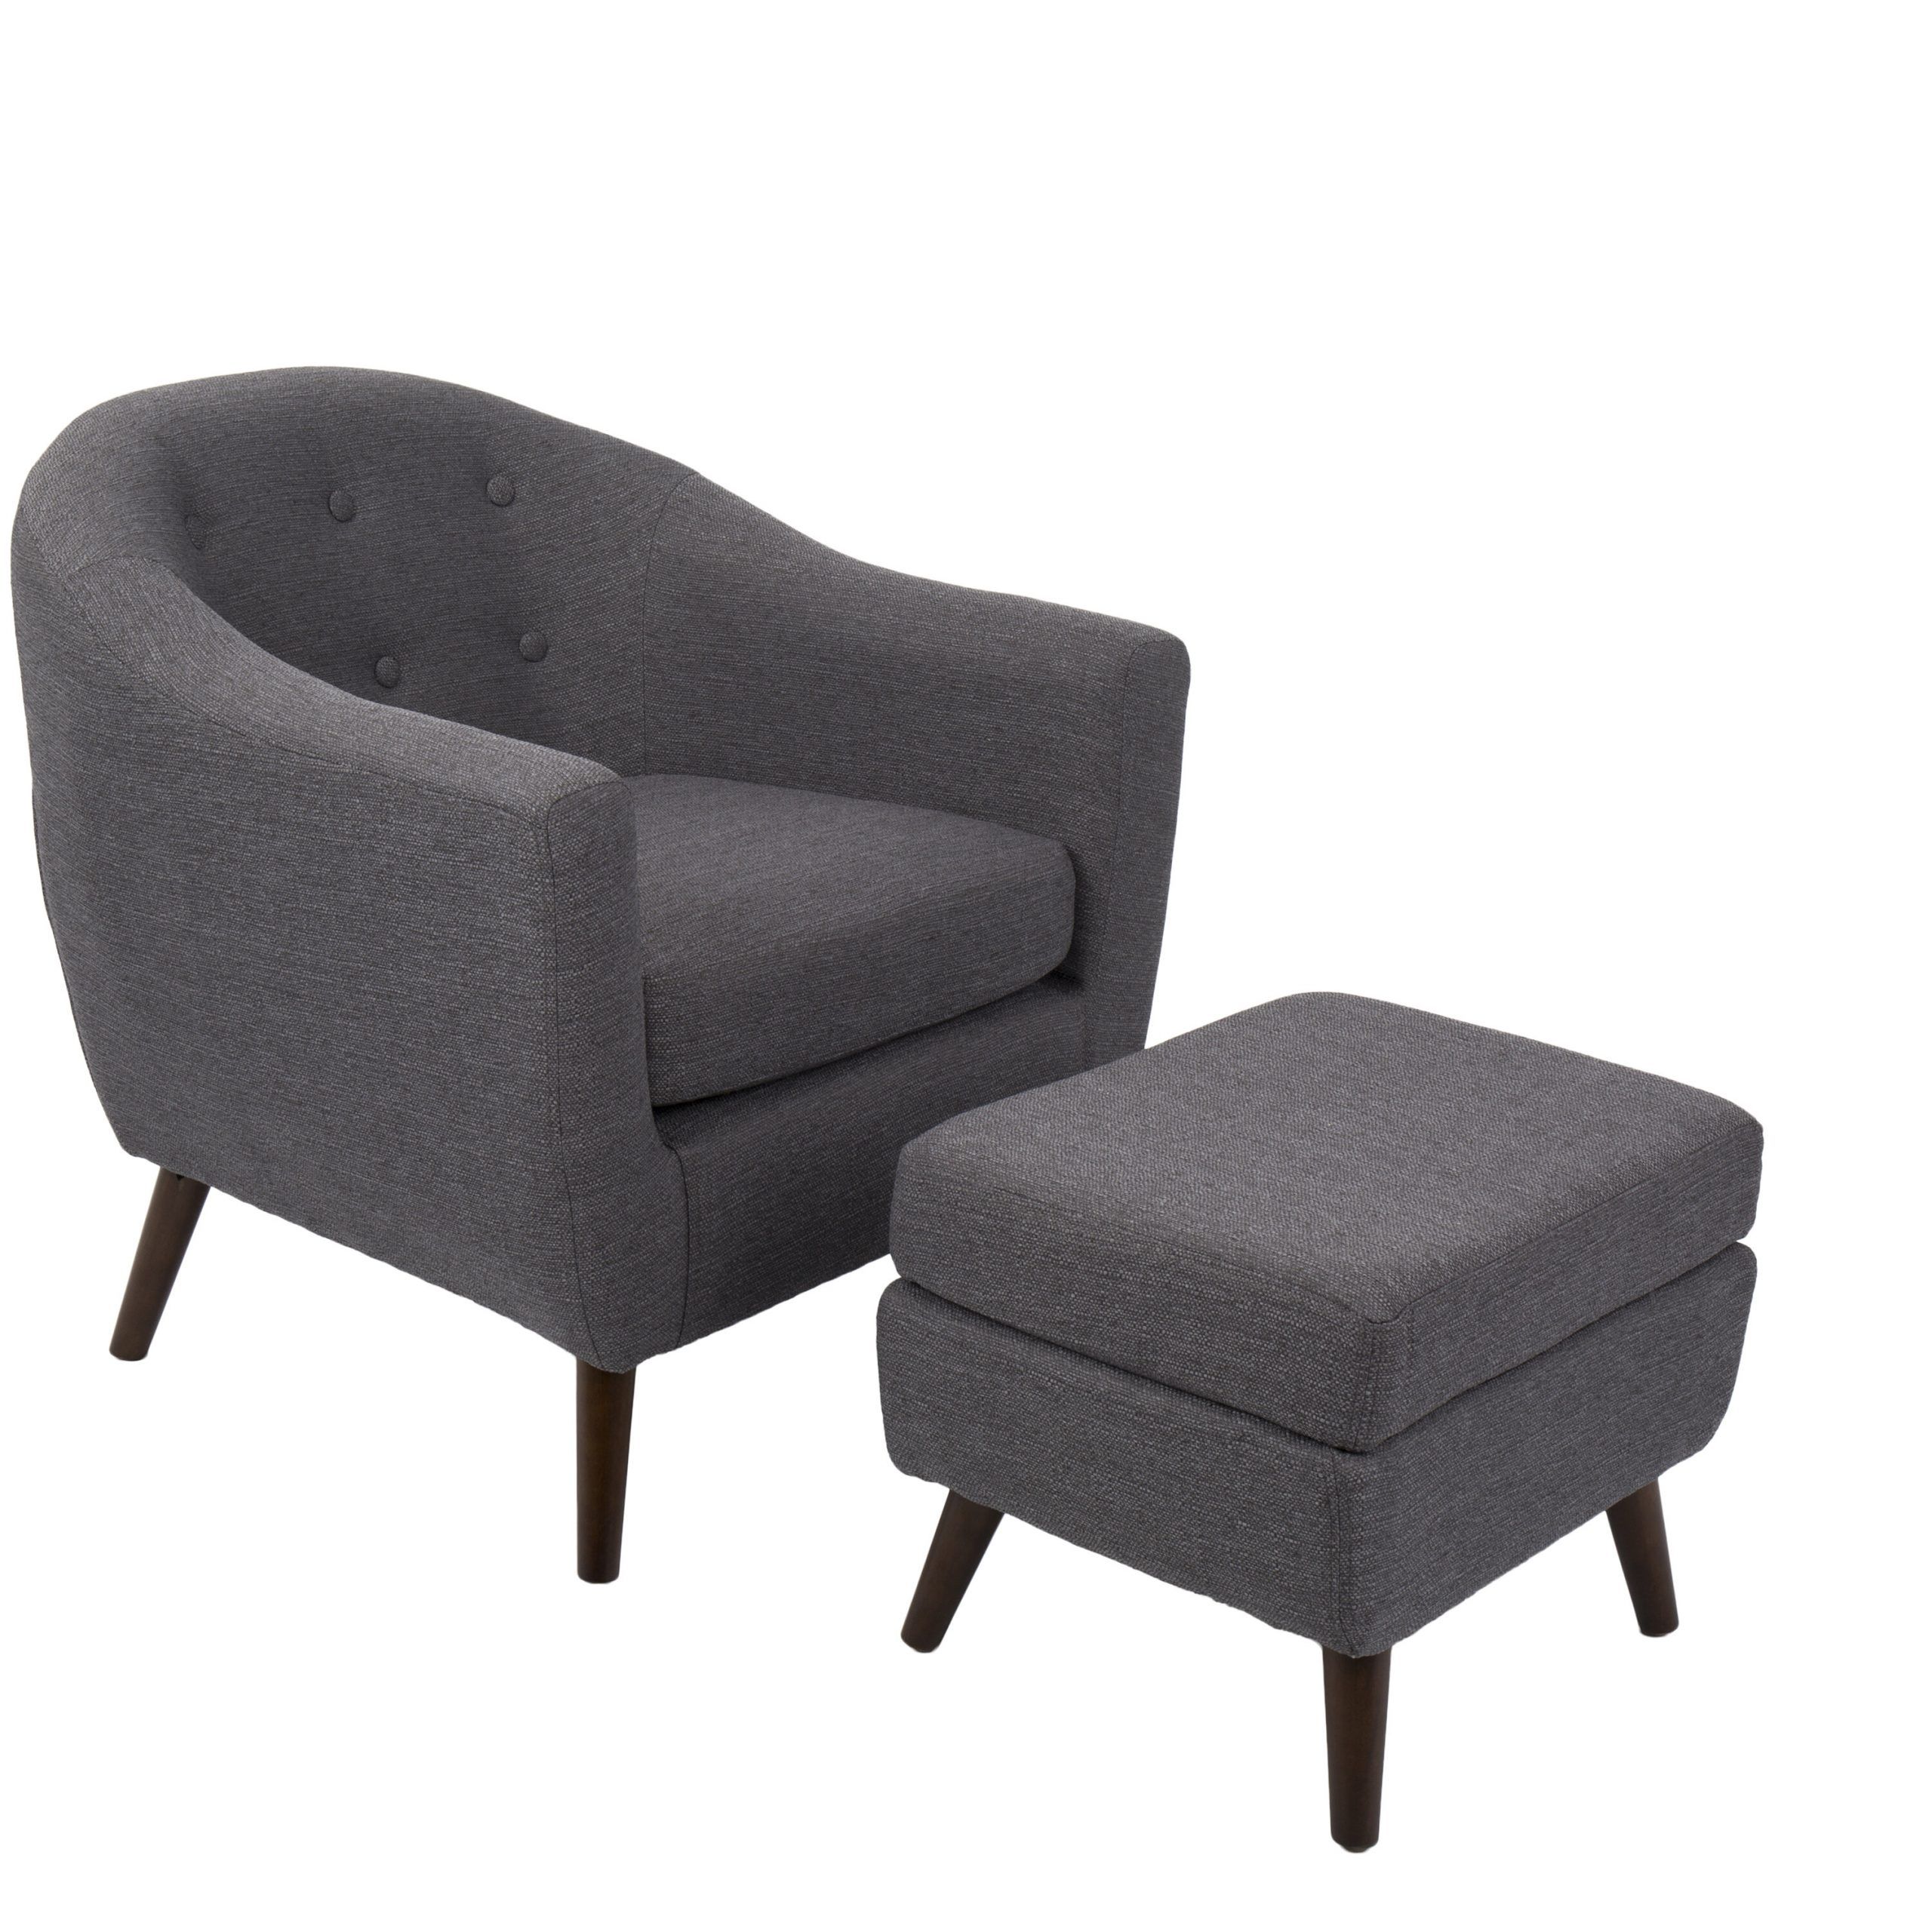 Dario 22" W Polyester Slipper Chair And Ottoman Pertaining To Harmon Cloud Barrel Chairs And Ottoman (View 13 of 15)